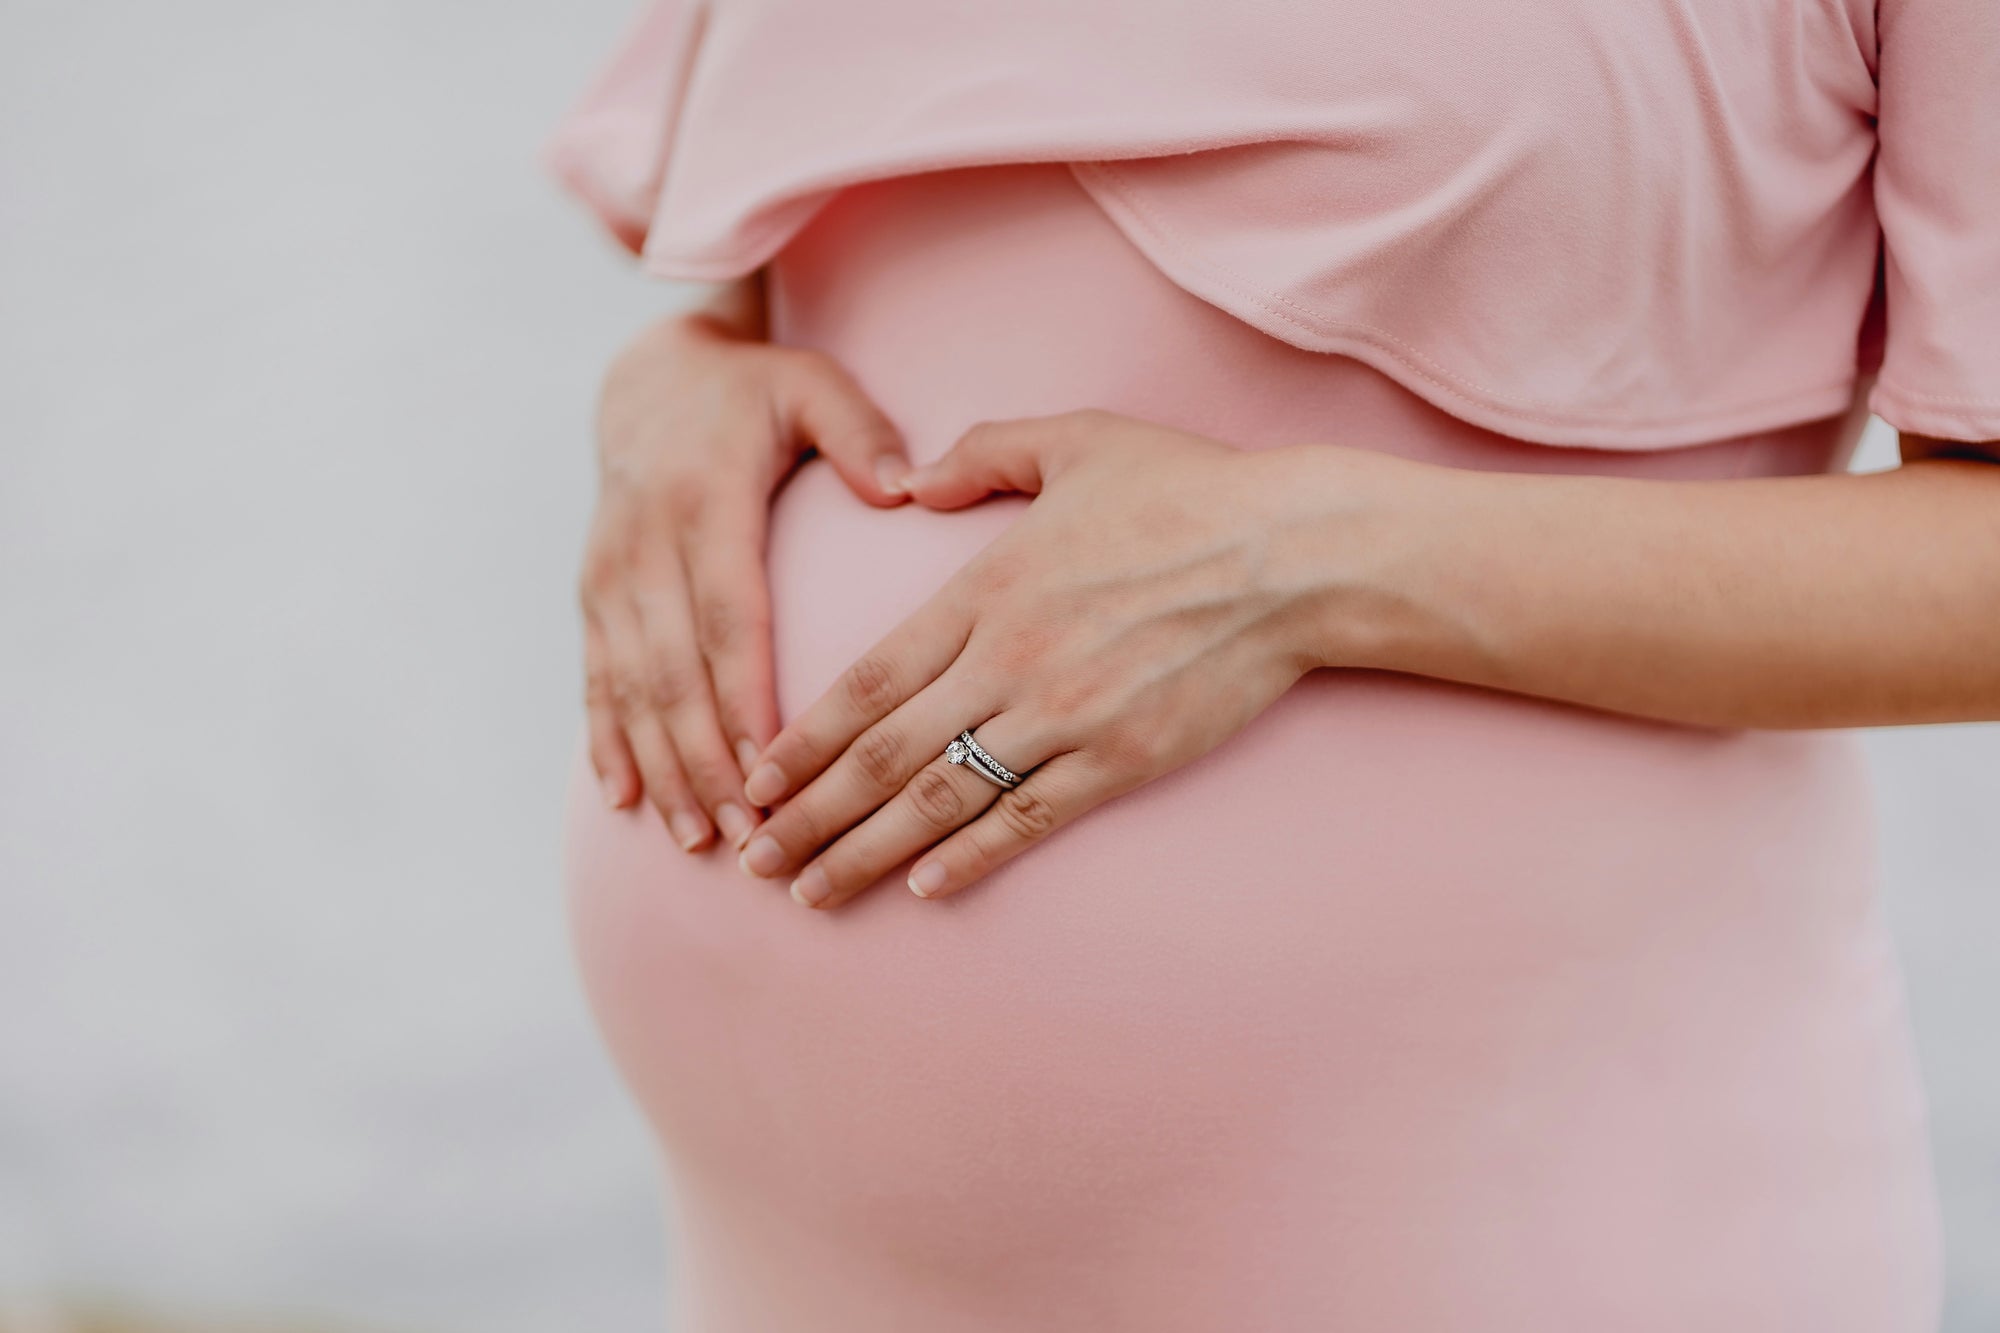 What causes hemorrhoids during pregnancy?